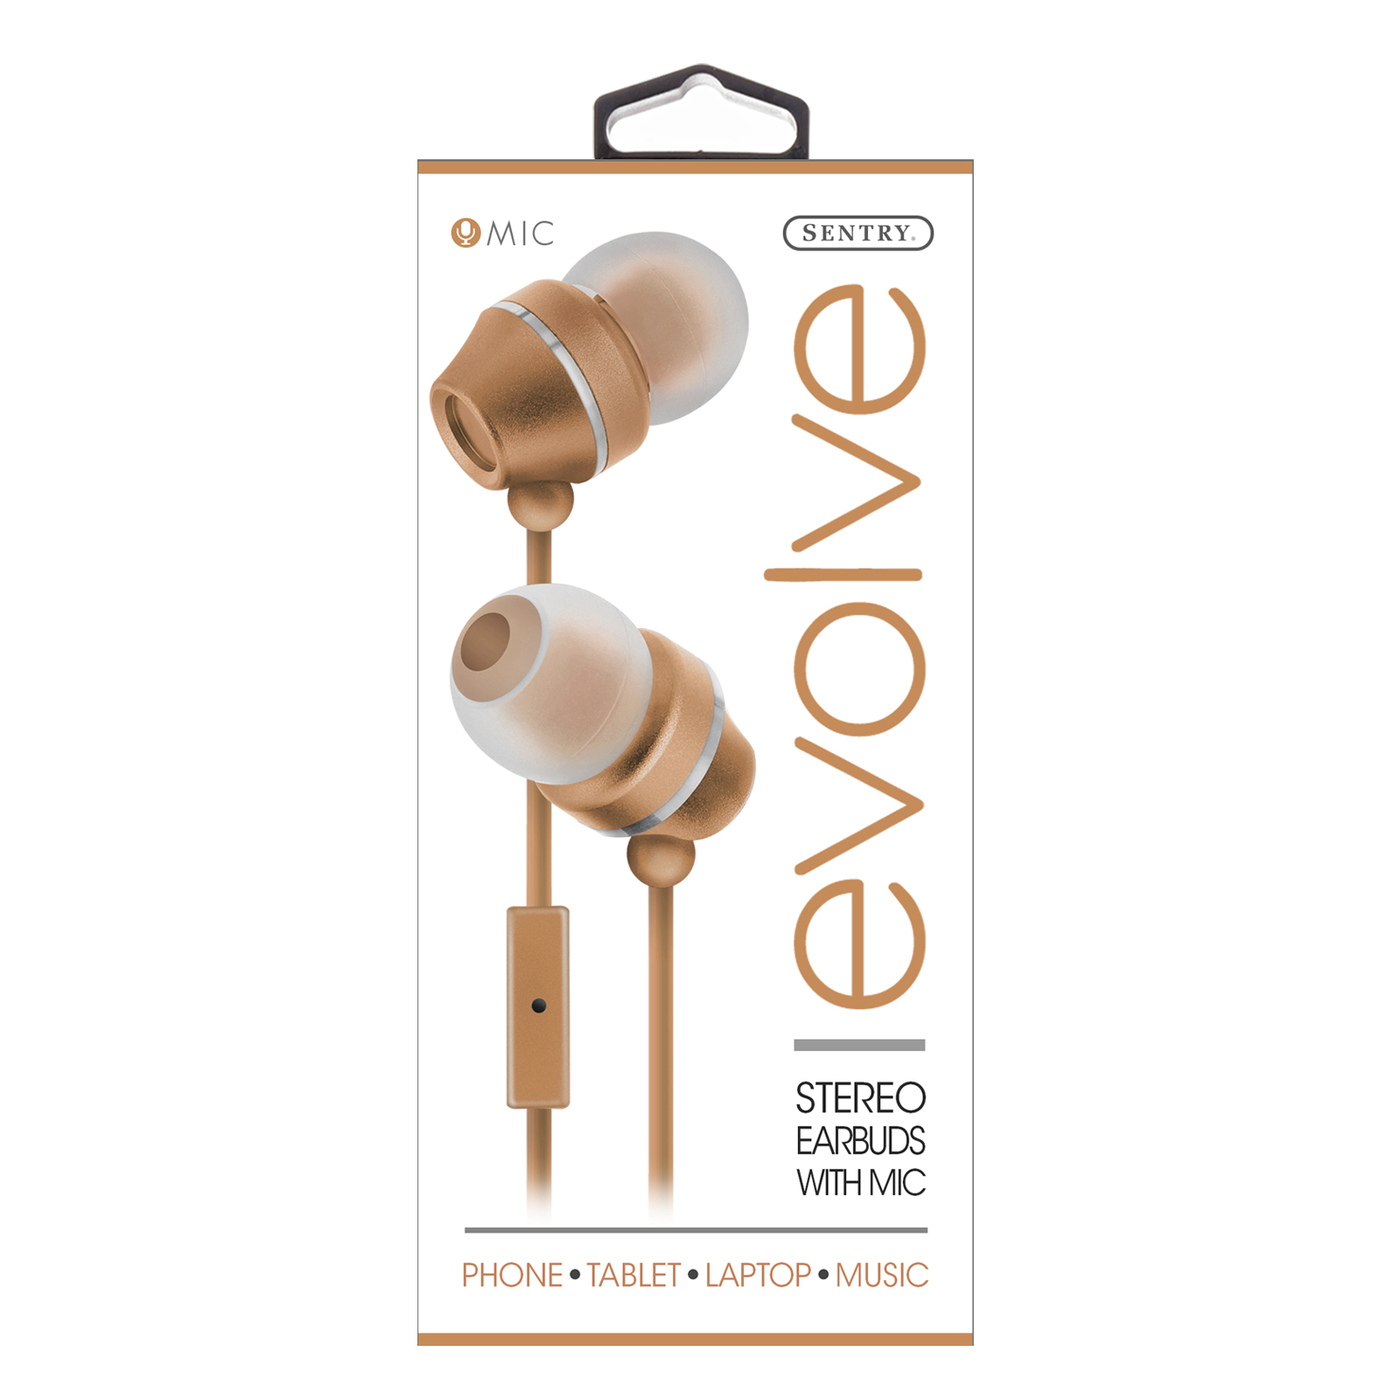 Earbud And In-ear Headphone Sentry Industries Hm165: Stereo Earbuds With In-line Mic In Rose Gold - image 1 of 2